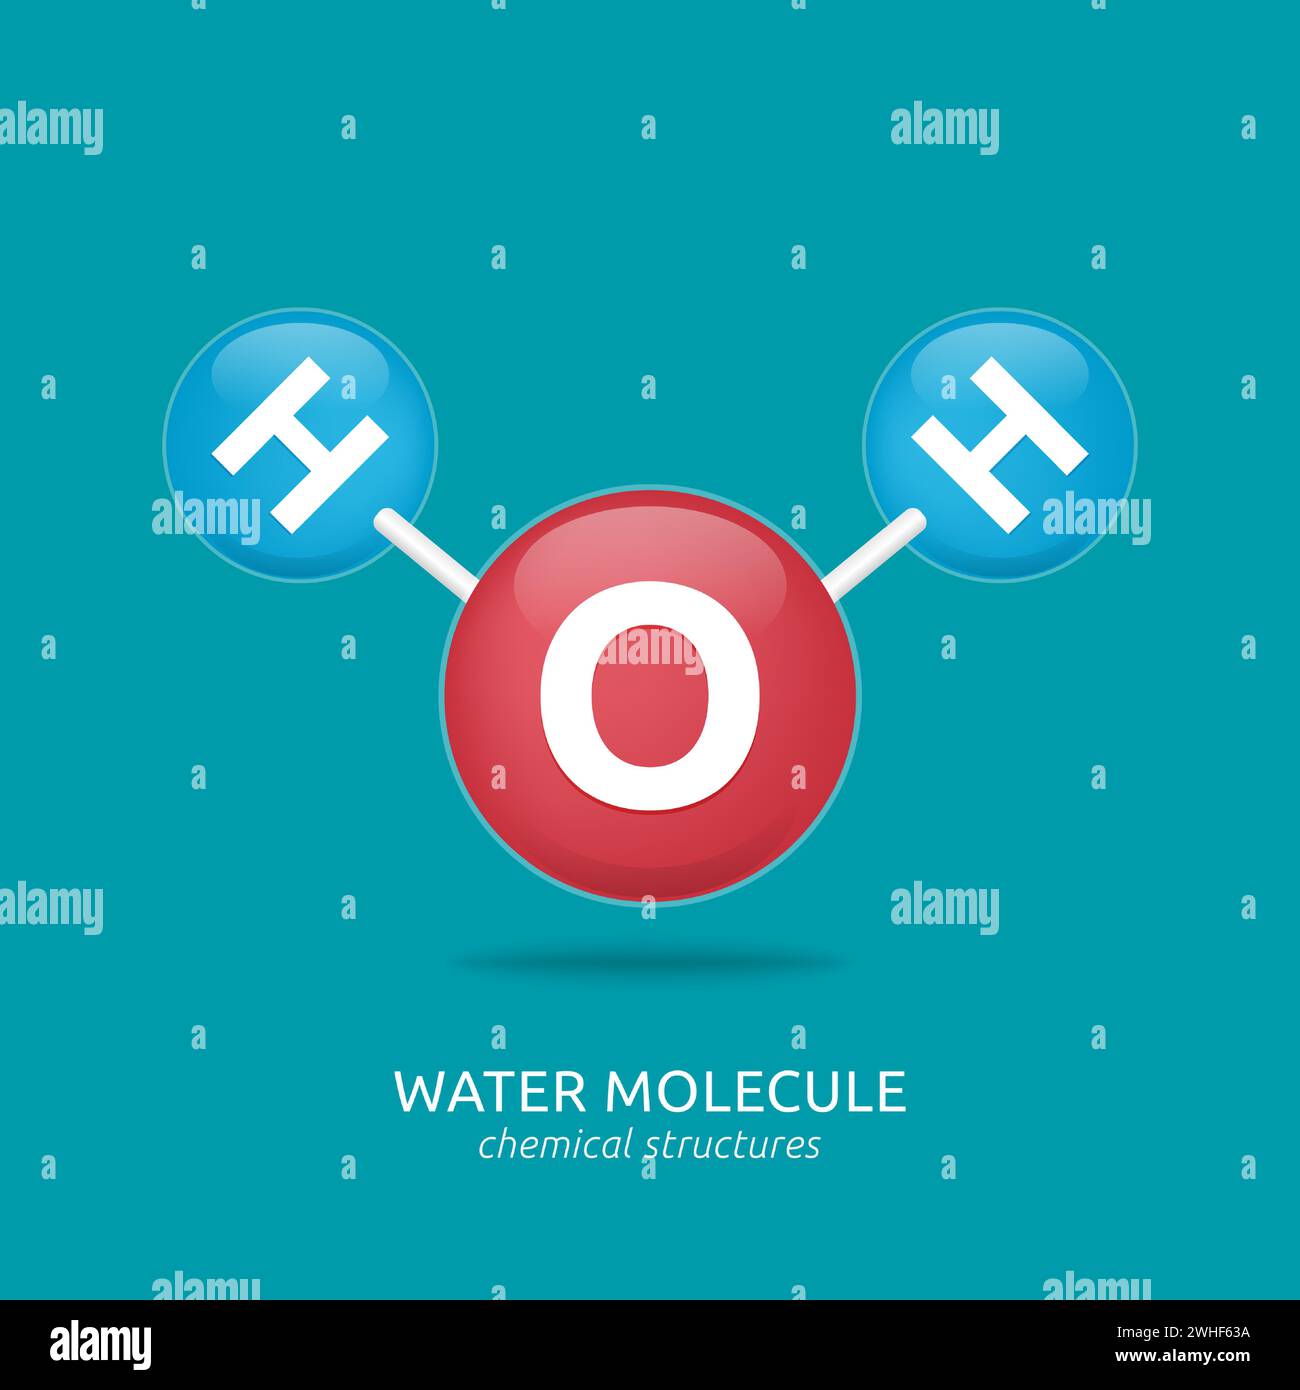 water compound symbol, chemical structures vector illustration Stock Vector